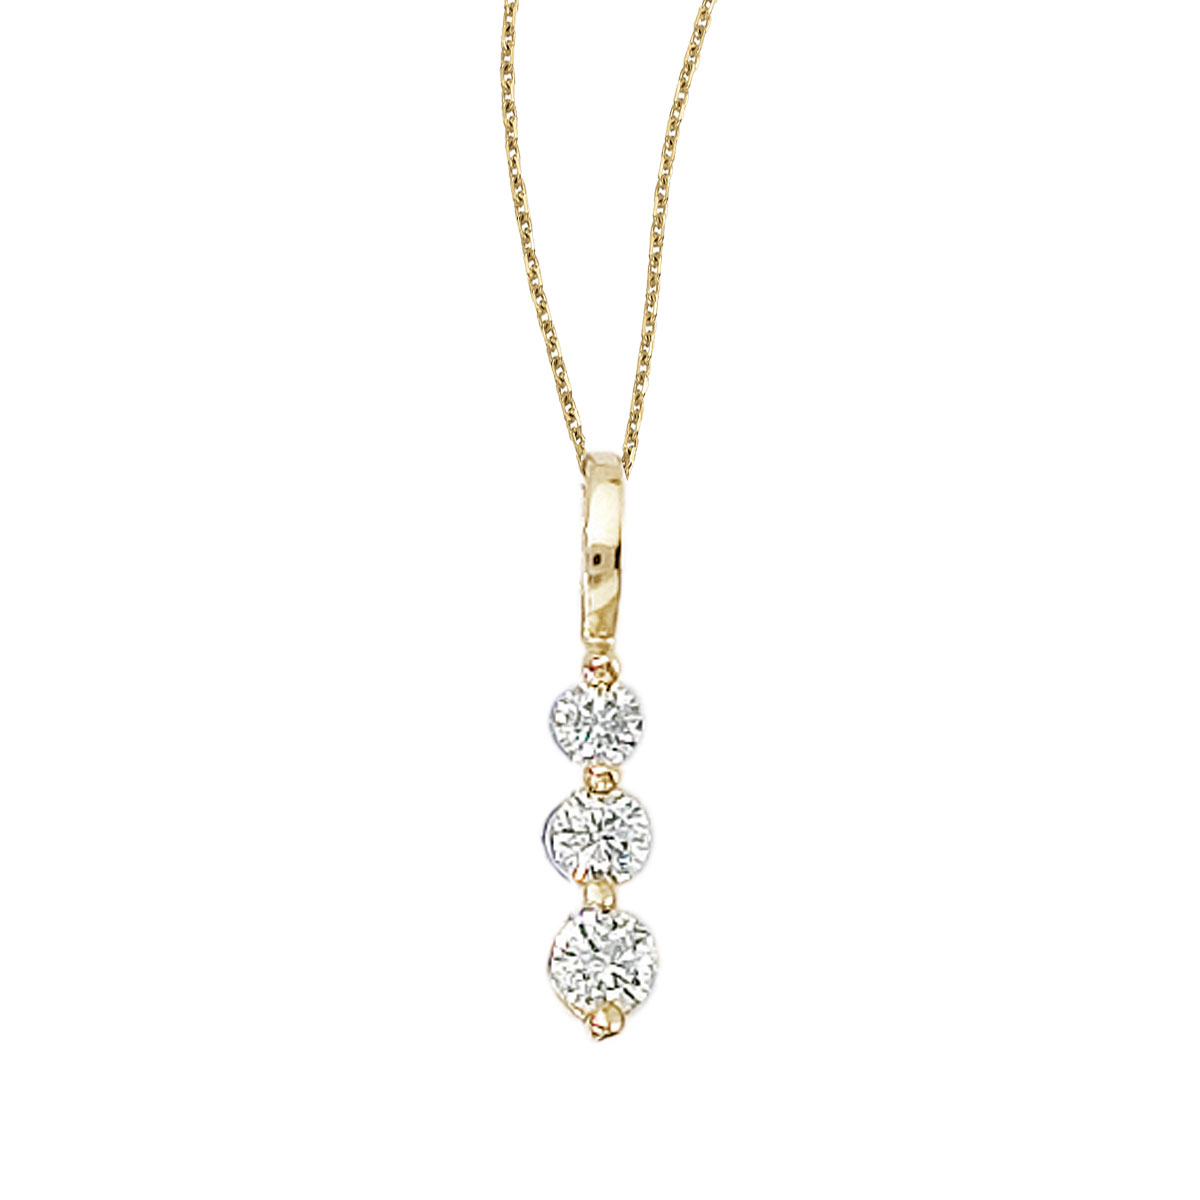 JCX2773: This 14k yellow gold 0.25 ct three stone diamond pendant features gorgeous sparkling diamonds in H-I color and SI clarity.